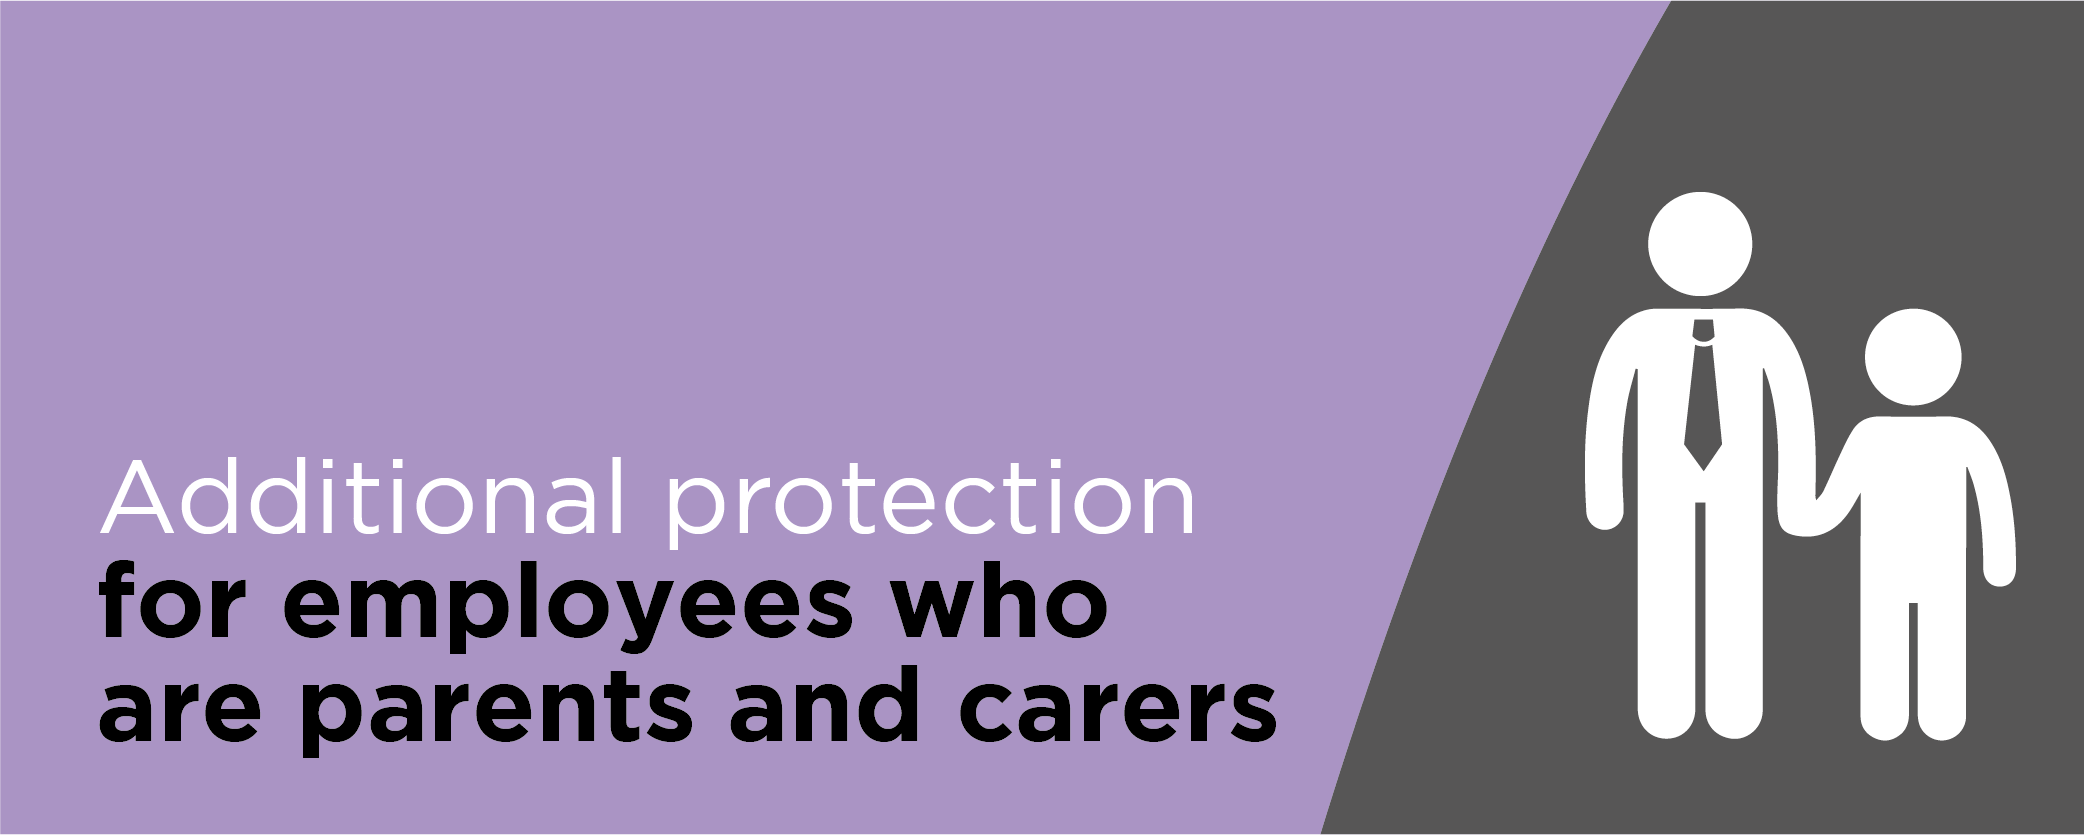 New employment laws to provide more protection for employees who are parents and carers